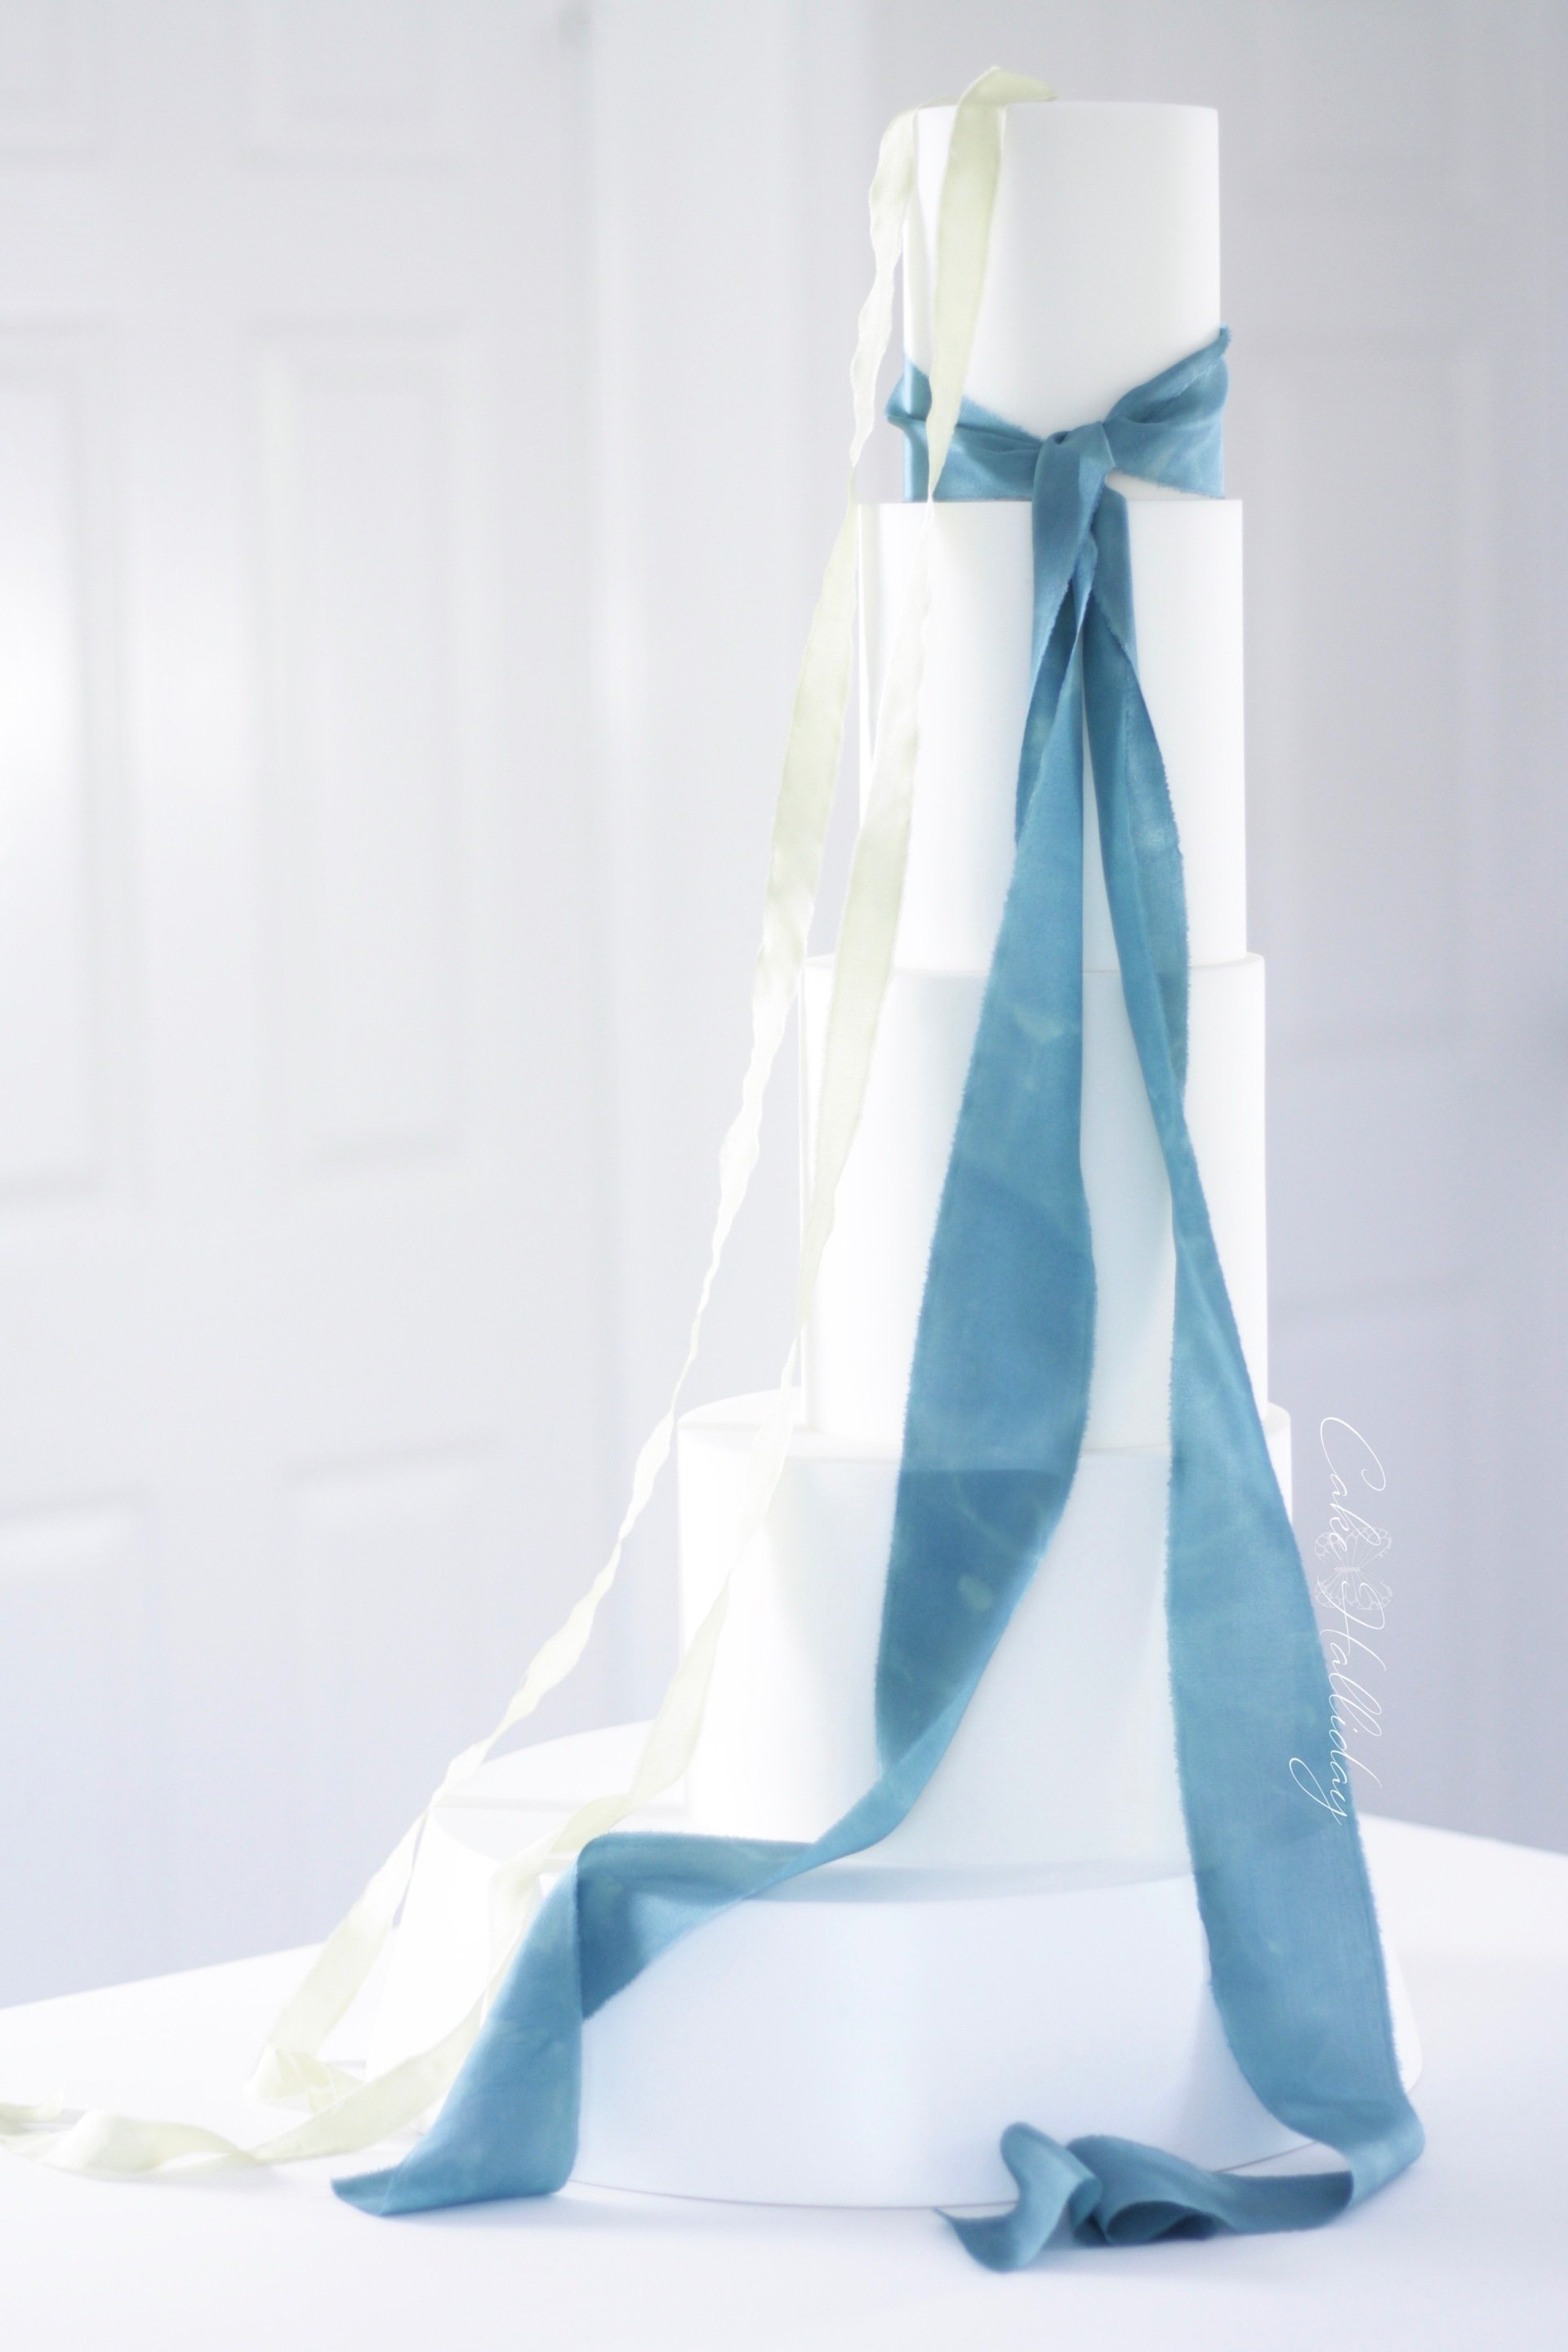 Four tier minimalist wedding cake with teal and lime silk ribbons